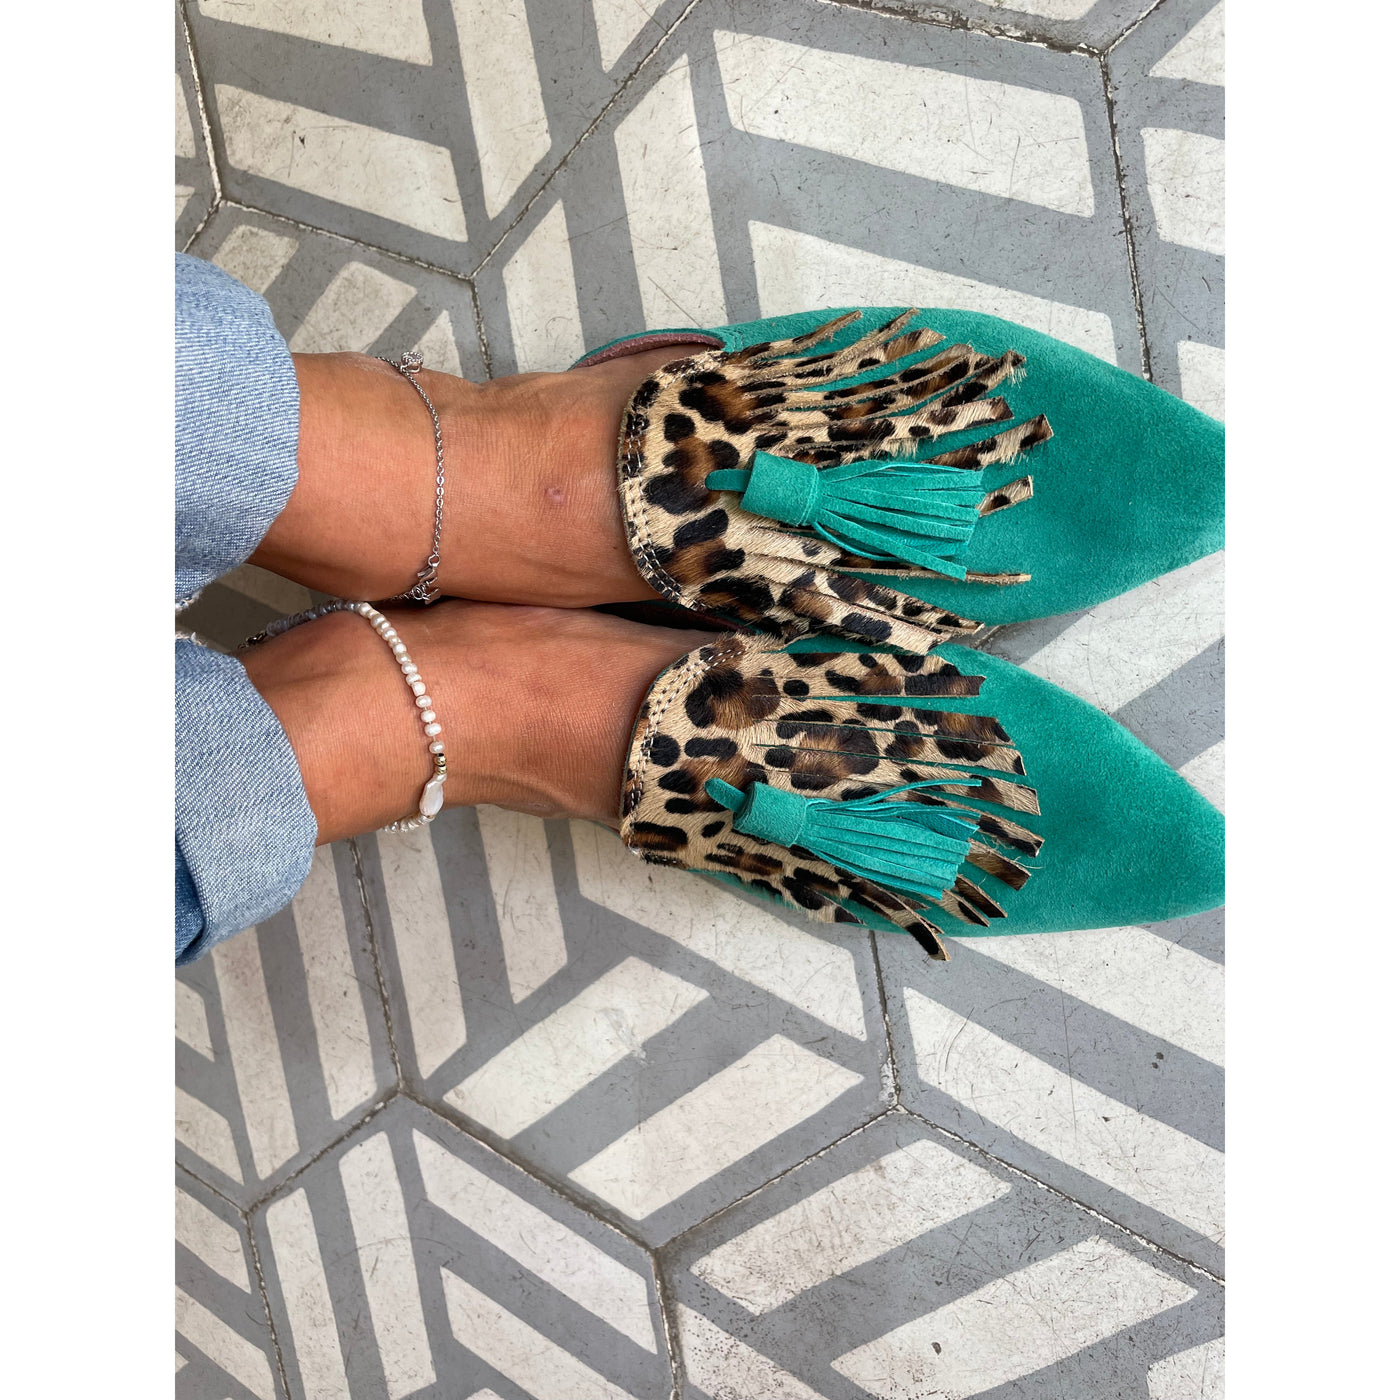 Marrakesh chic turquoise green shoes